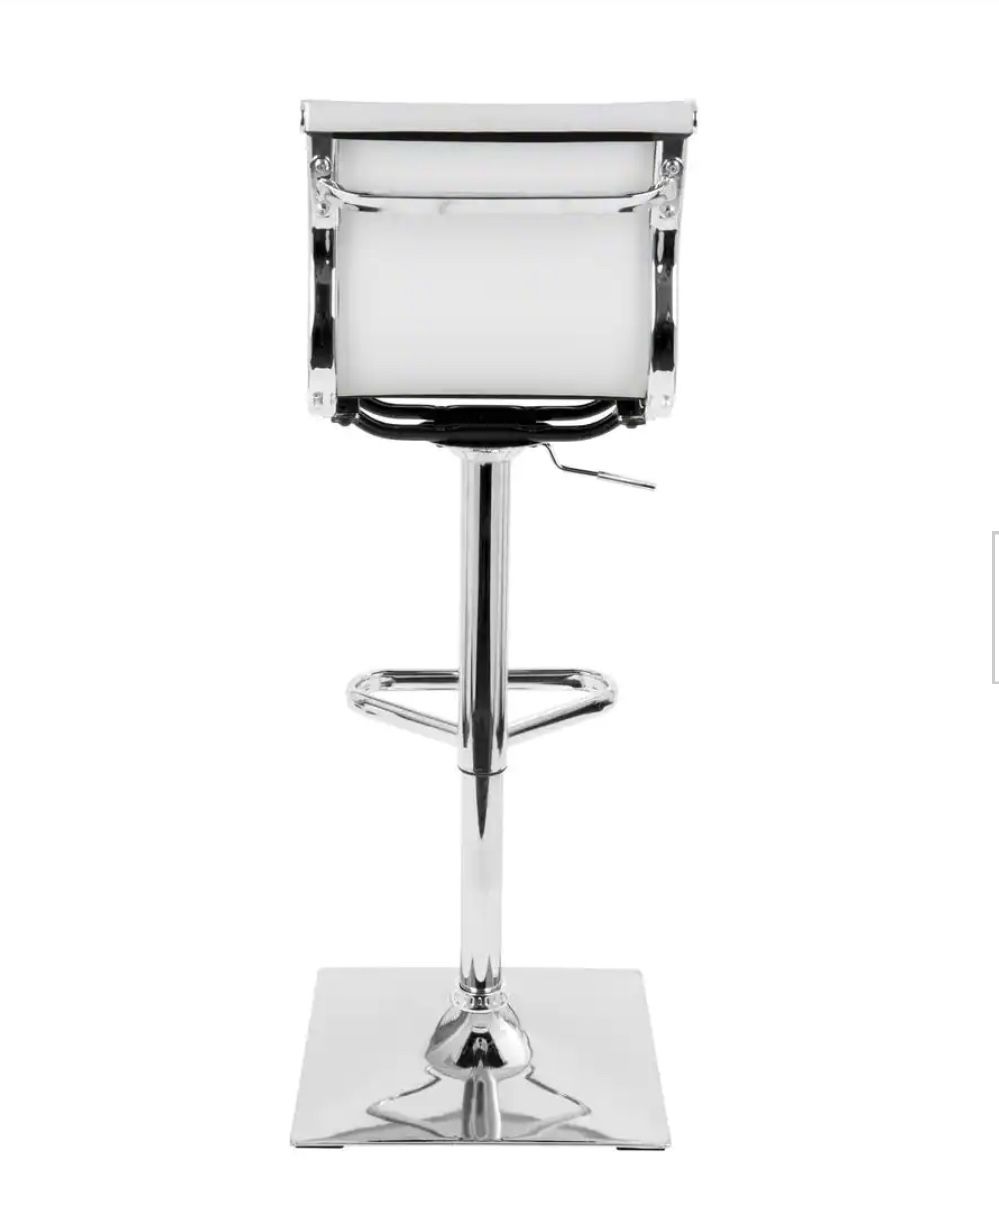 Set of 2 new in box Mirage White Adjustable Height Bar Stool (retail $240)